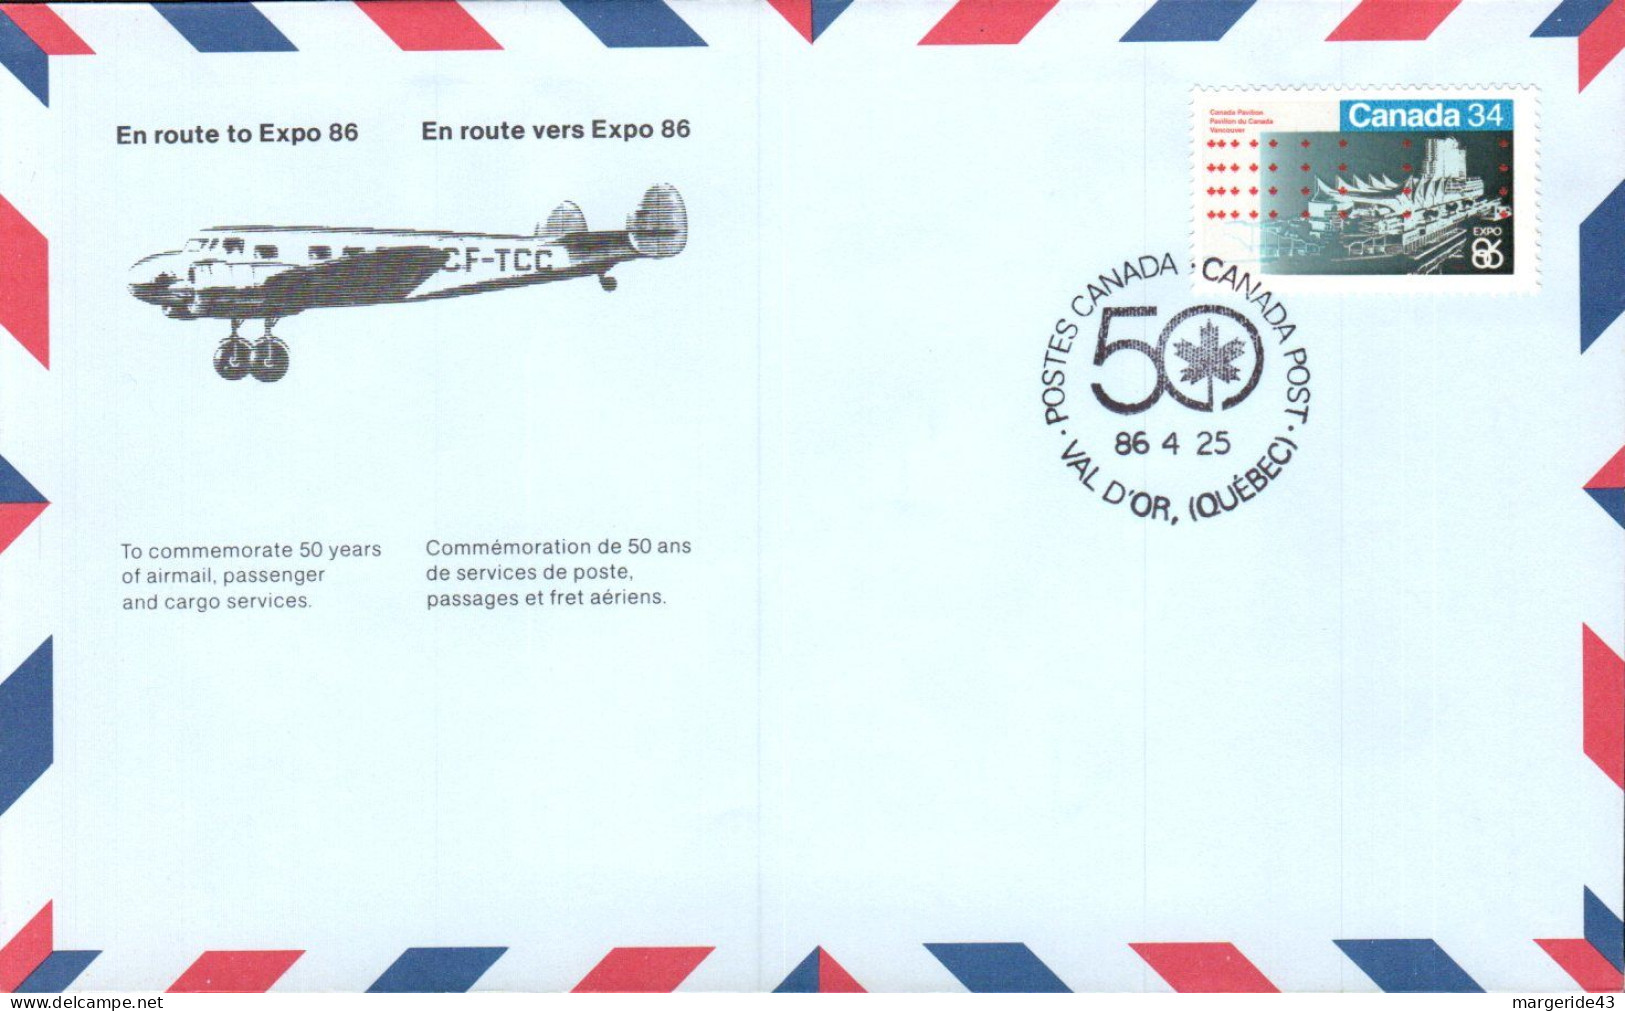 CANADA 1986 EN ROUTE VERS EXPO 86 - VAL D'OR - Commemorative Covers